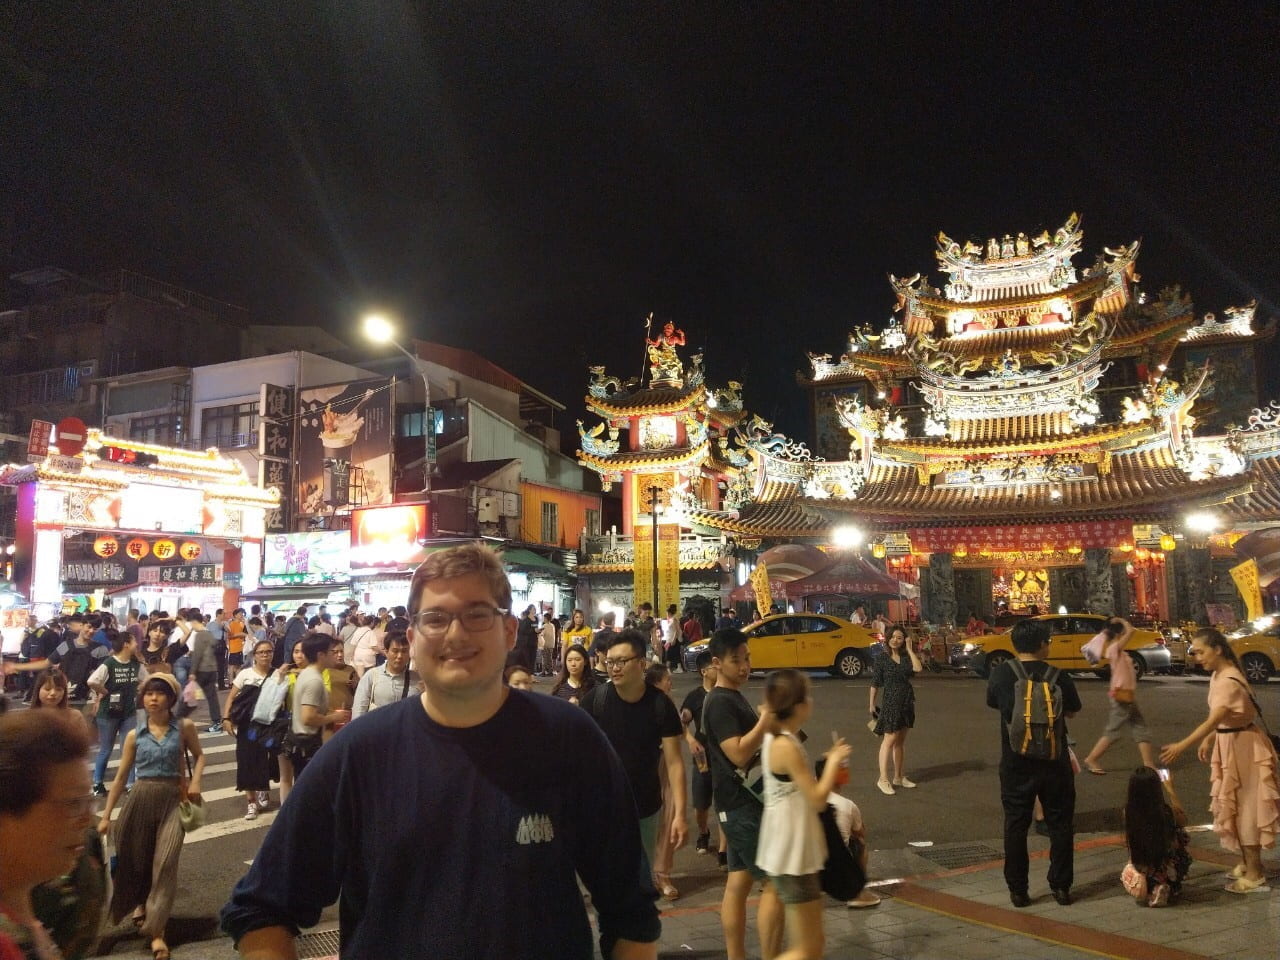 Sigur language fellow poses in front of a large gate at a busy intersection at night in Taipei in front of a busy street with the Raohe Night market and temple gate behind him